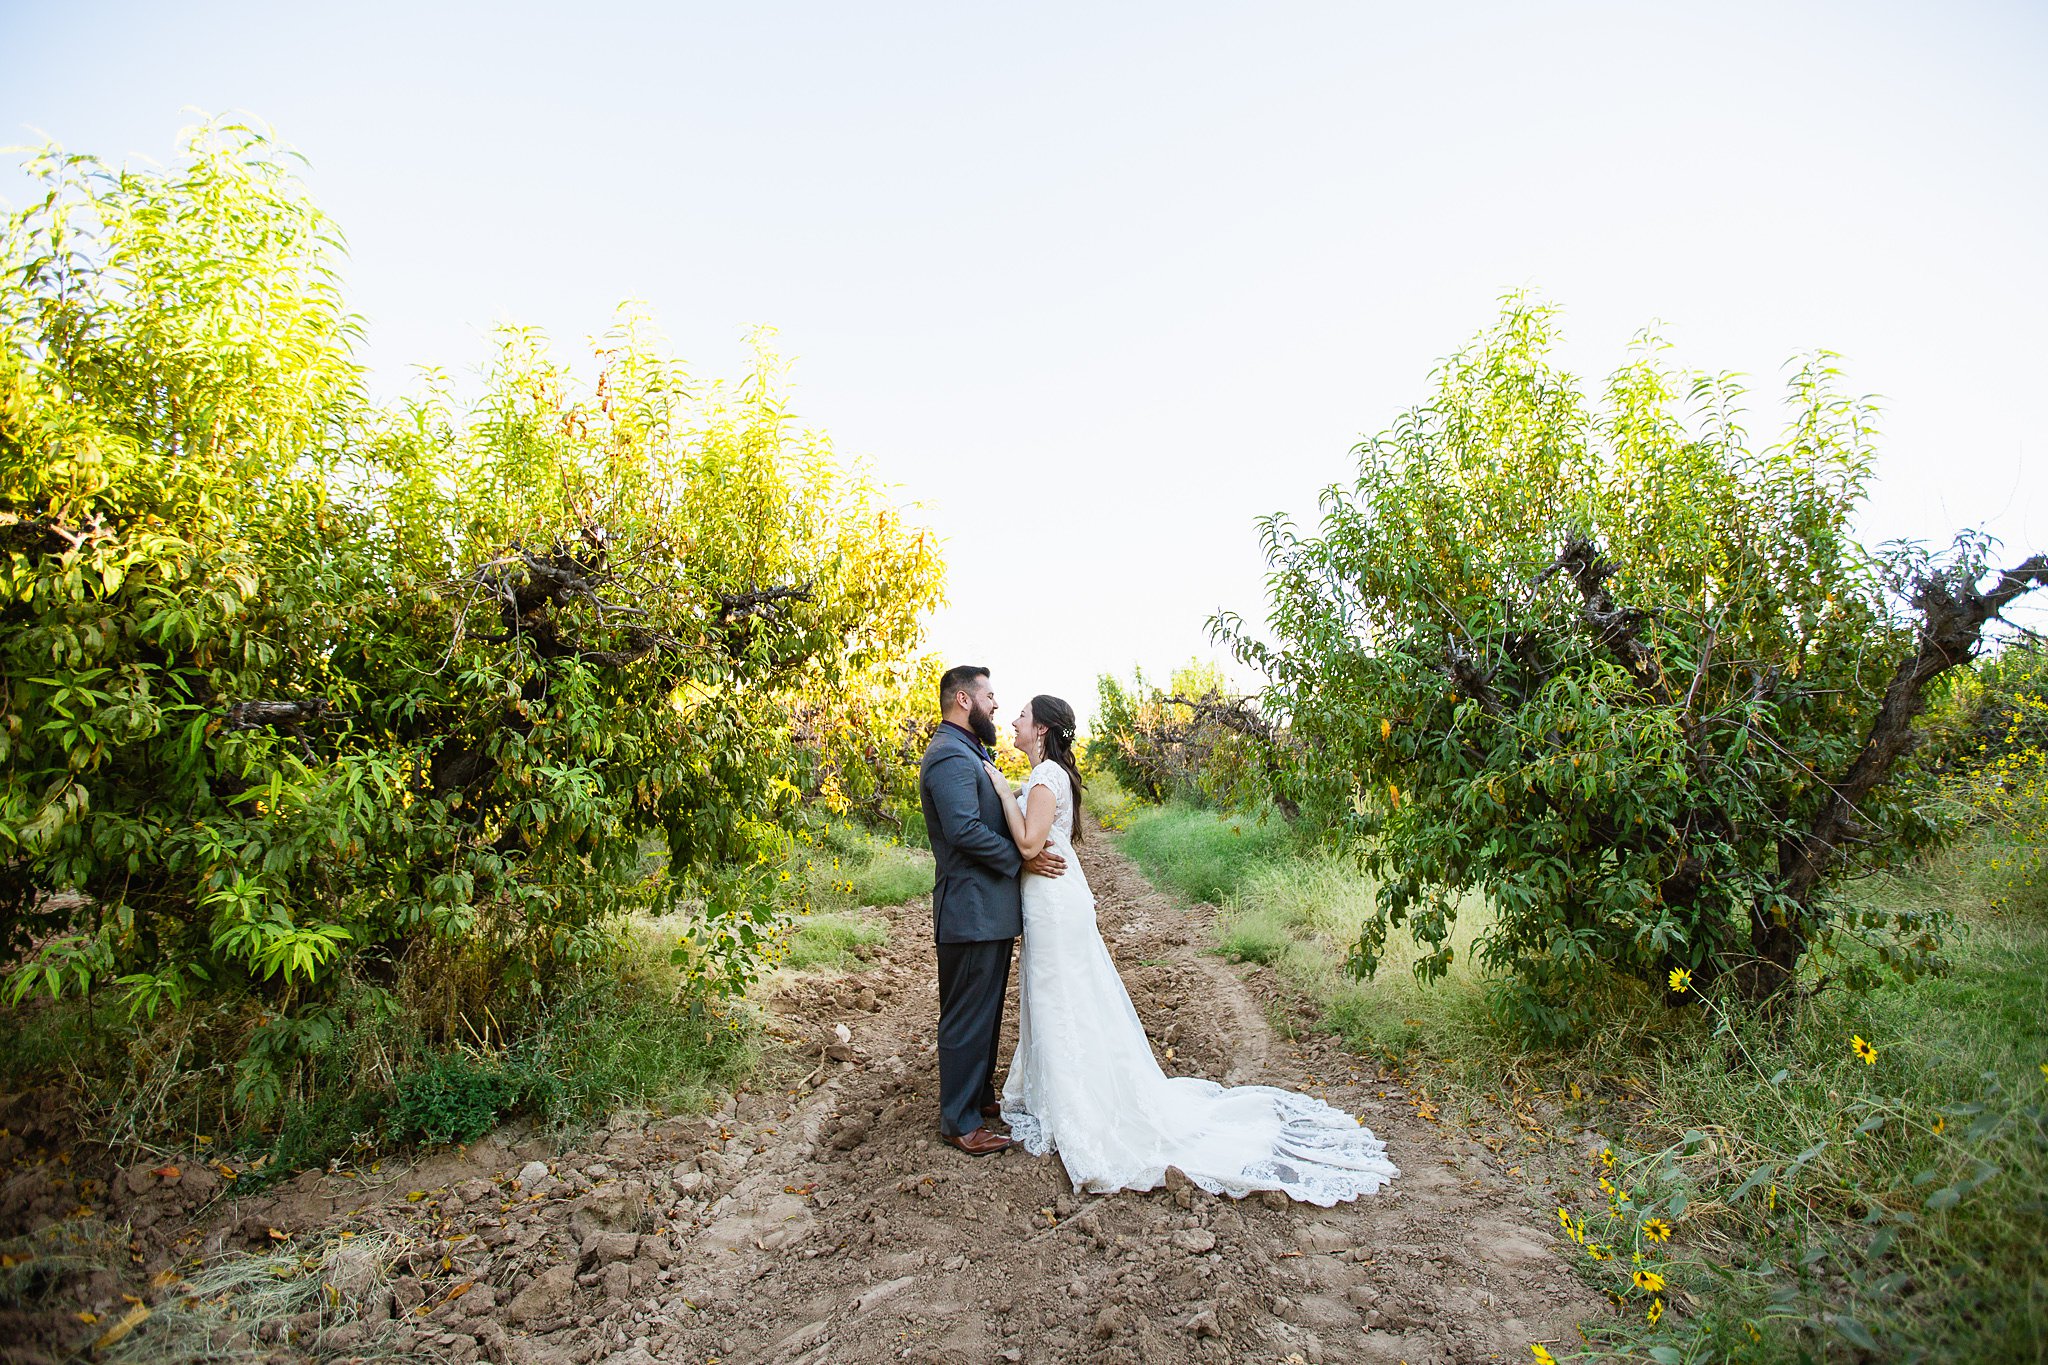 Bride and groom sharing a laugh in the orchard at the Schnepf Farm's Farmhouse by Phoenix wedding photographers PMA Photography.